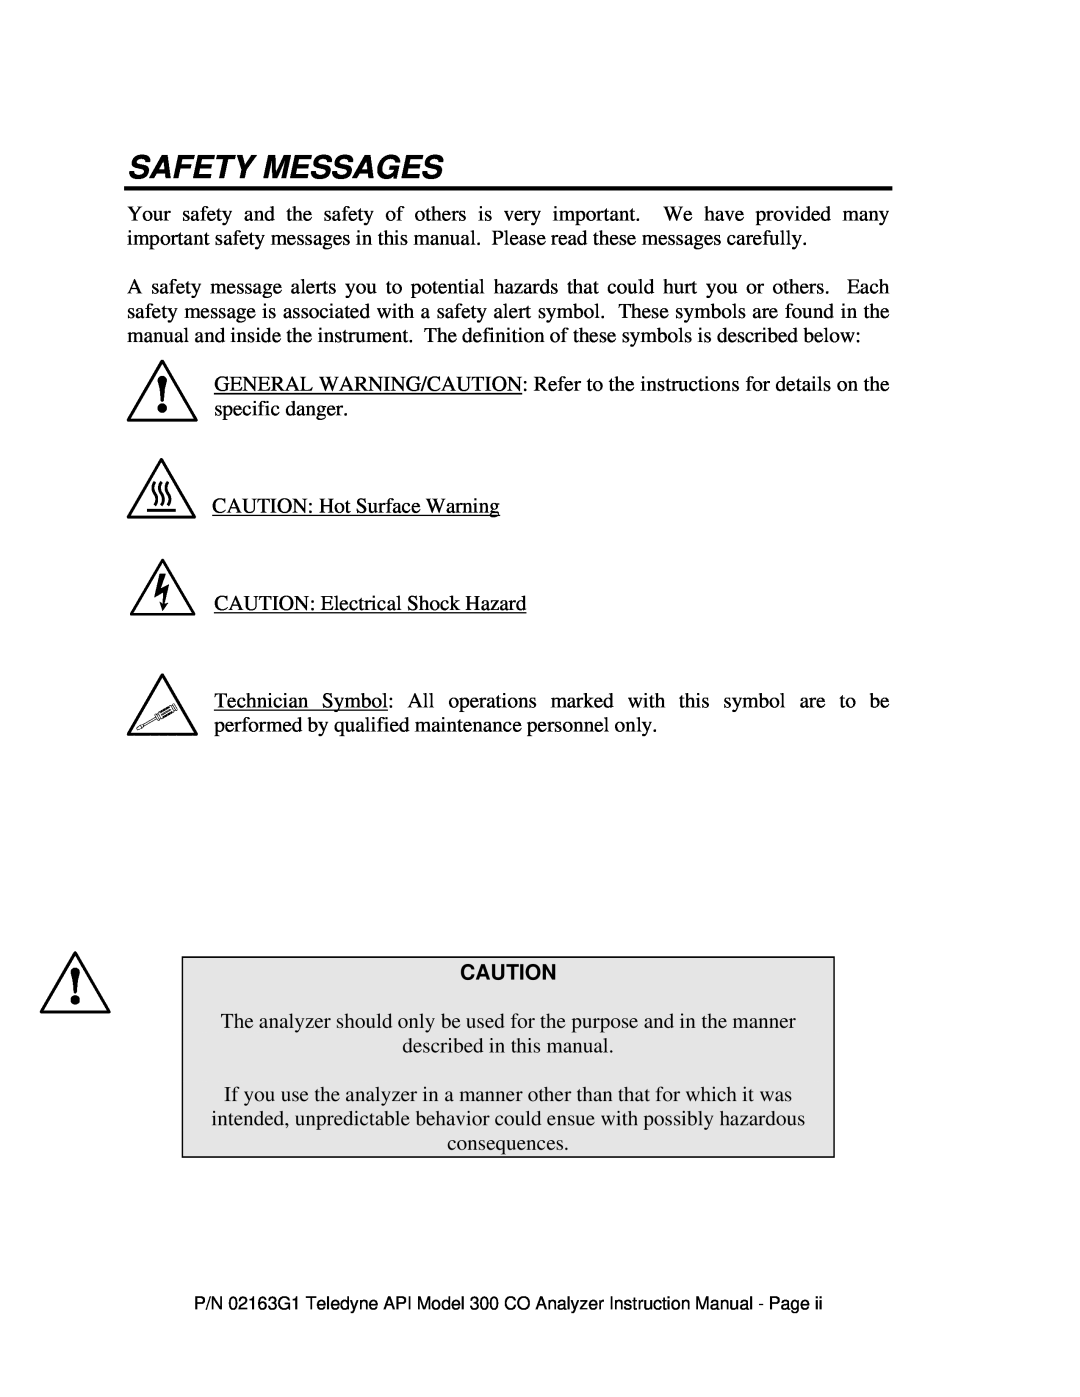 Teledyne 300 instruction manual Safety Messages 